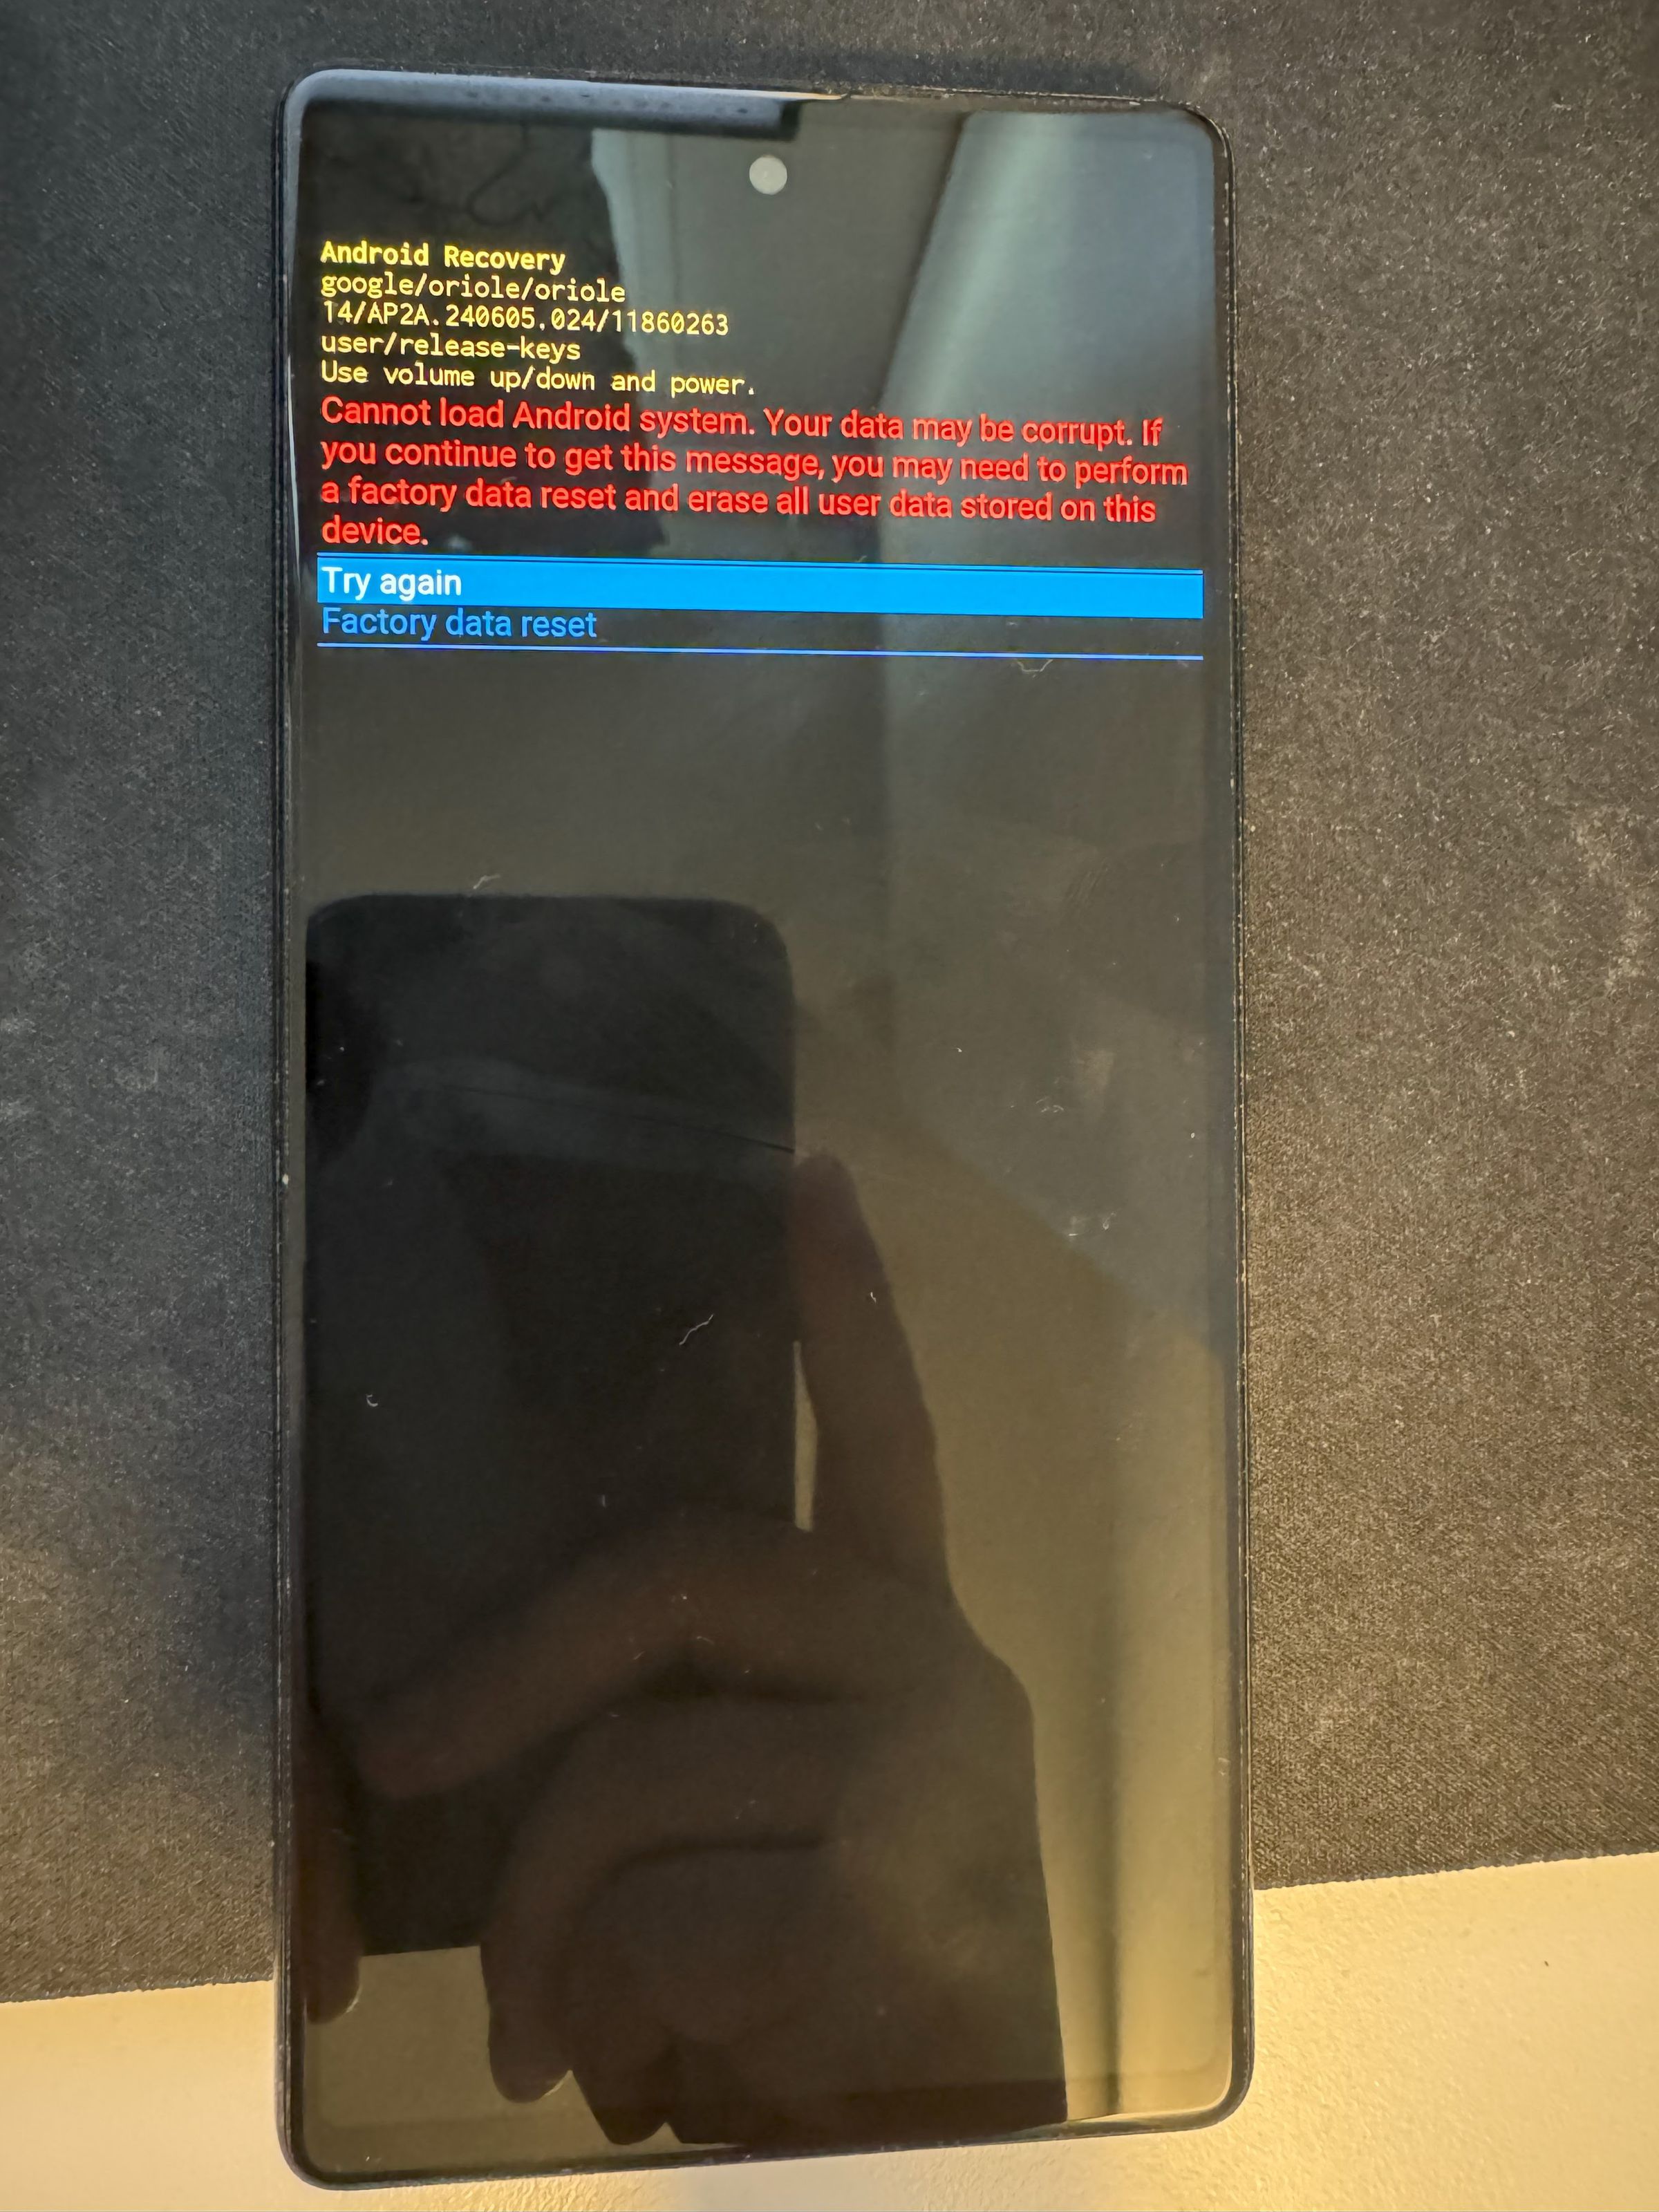 A picture of a Pixel phone with red lettering indicating that the OS cannot load.